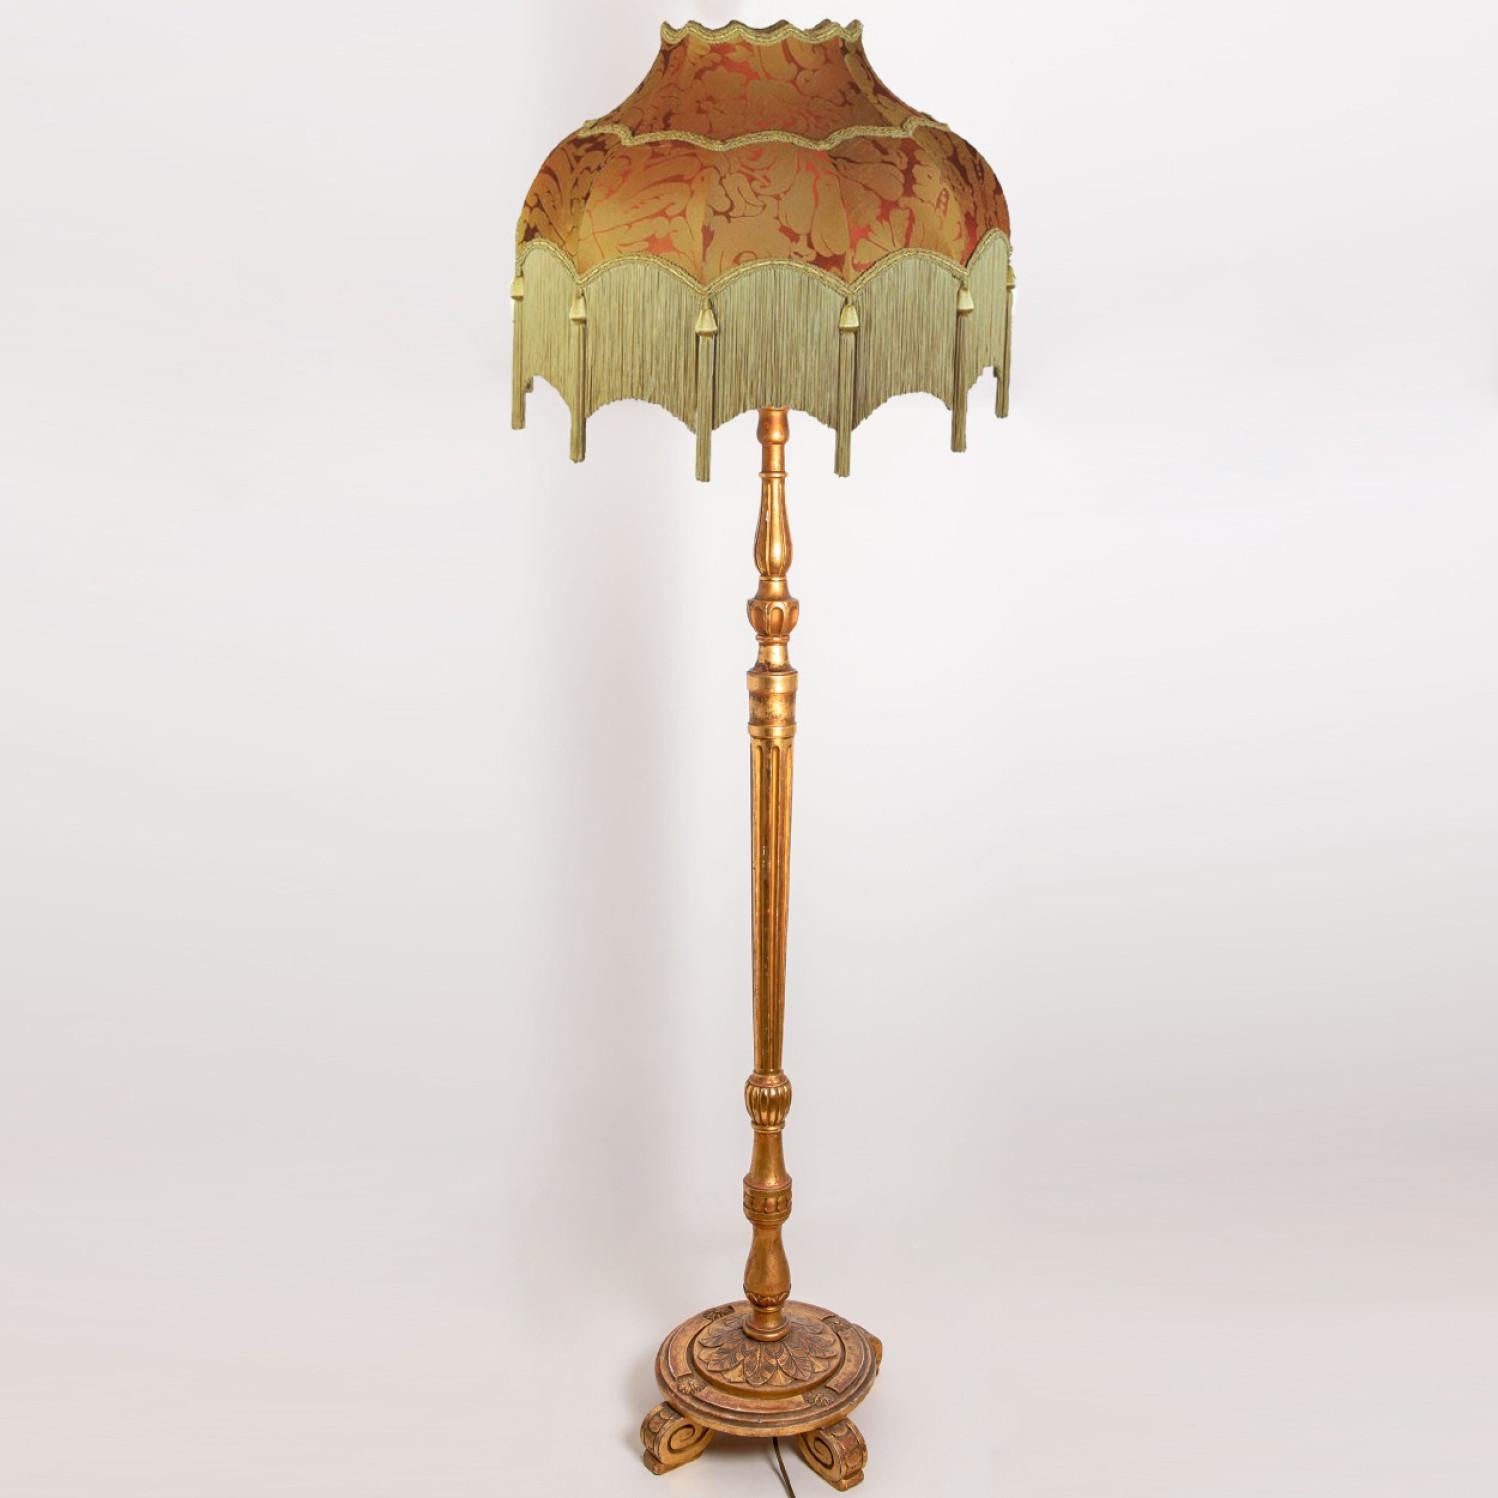 Beautiful hand carved italian wooden floor lamp with wonderful handmade fringed lampshade. The wooden base is hand carved and made in Italy around 1970.
The lamp features a striking scalloped lampshade in terracotta damask with gold fringe and